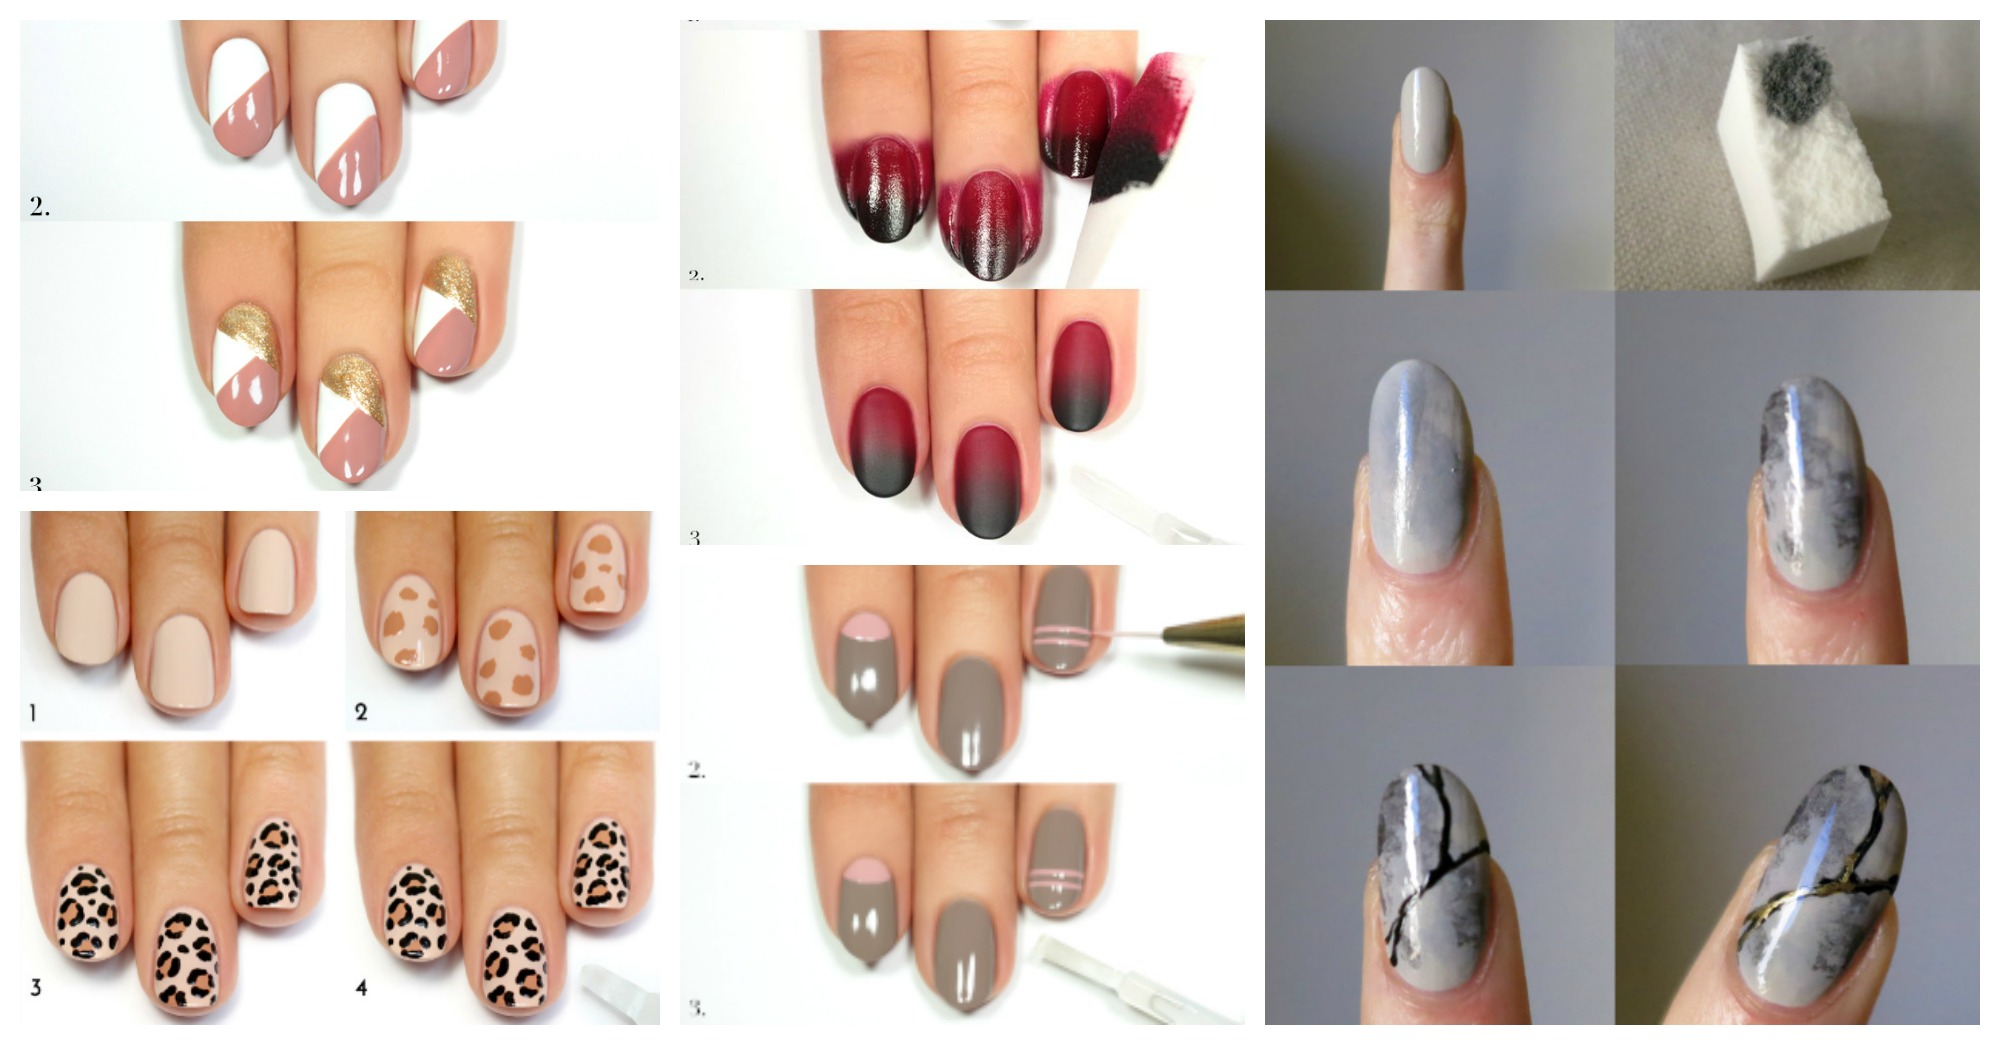 2. Step-by-Step Nail Art Tutorials - wide 1